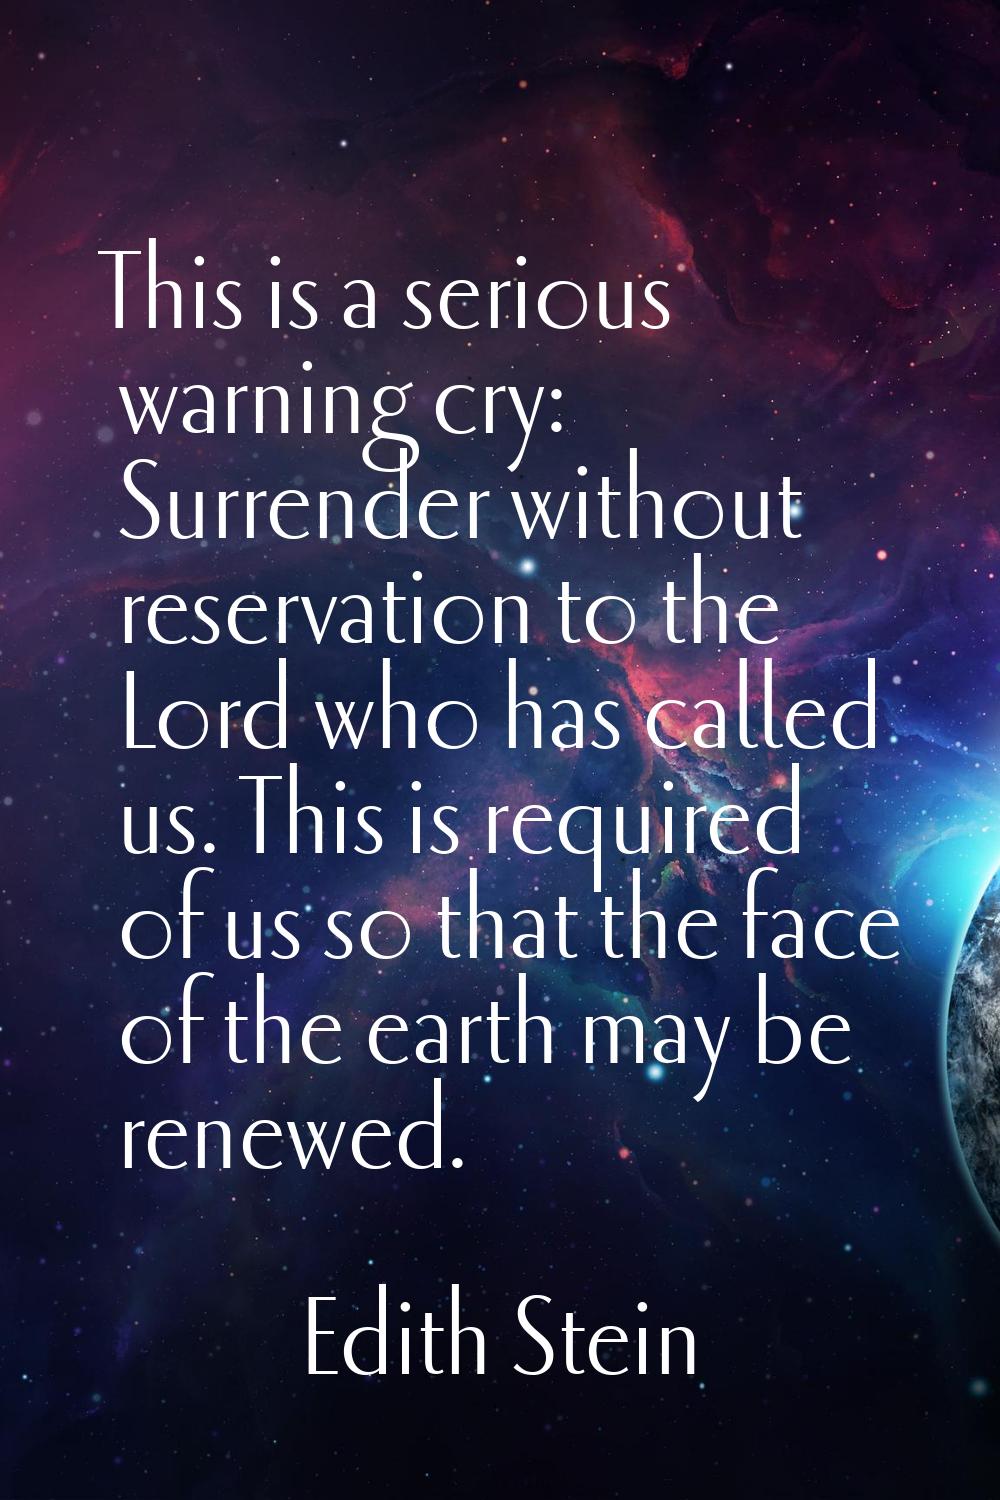 This is a serious warning cry: Surrender without reservation to the Lord who has called us. This is